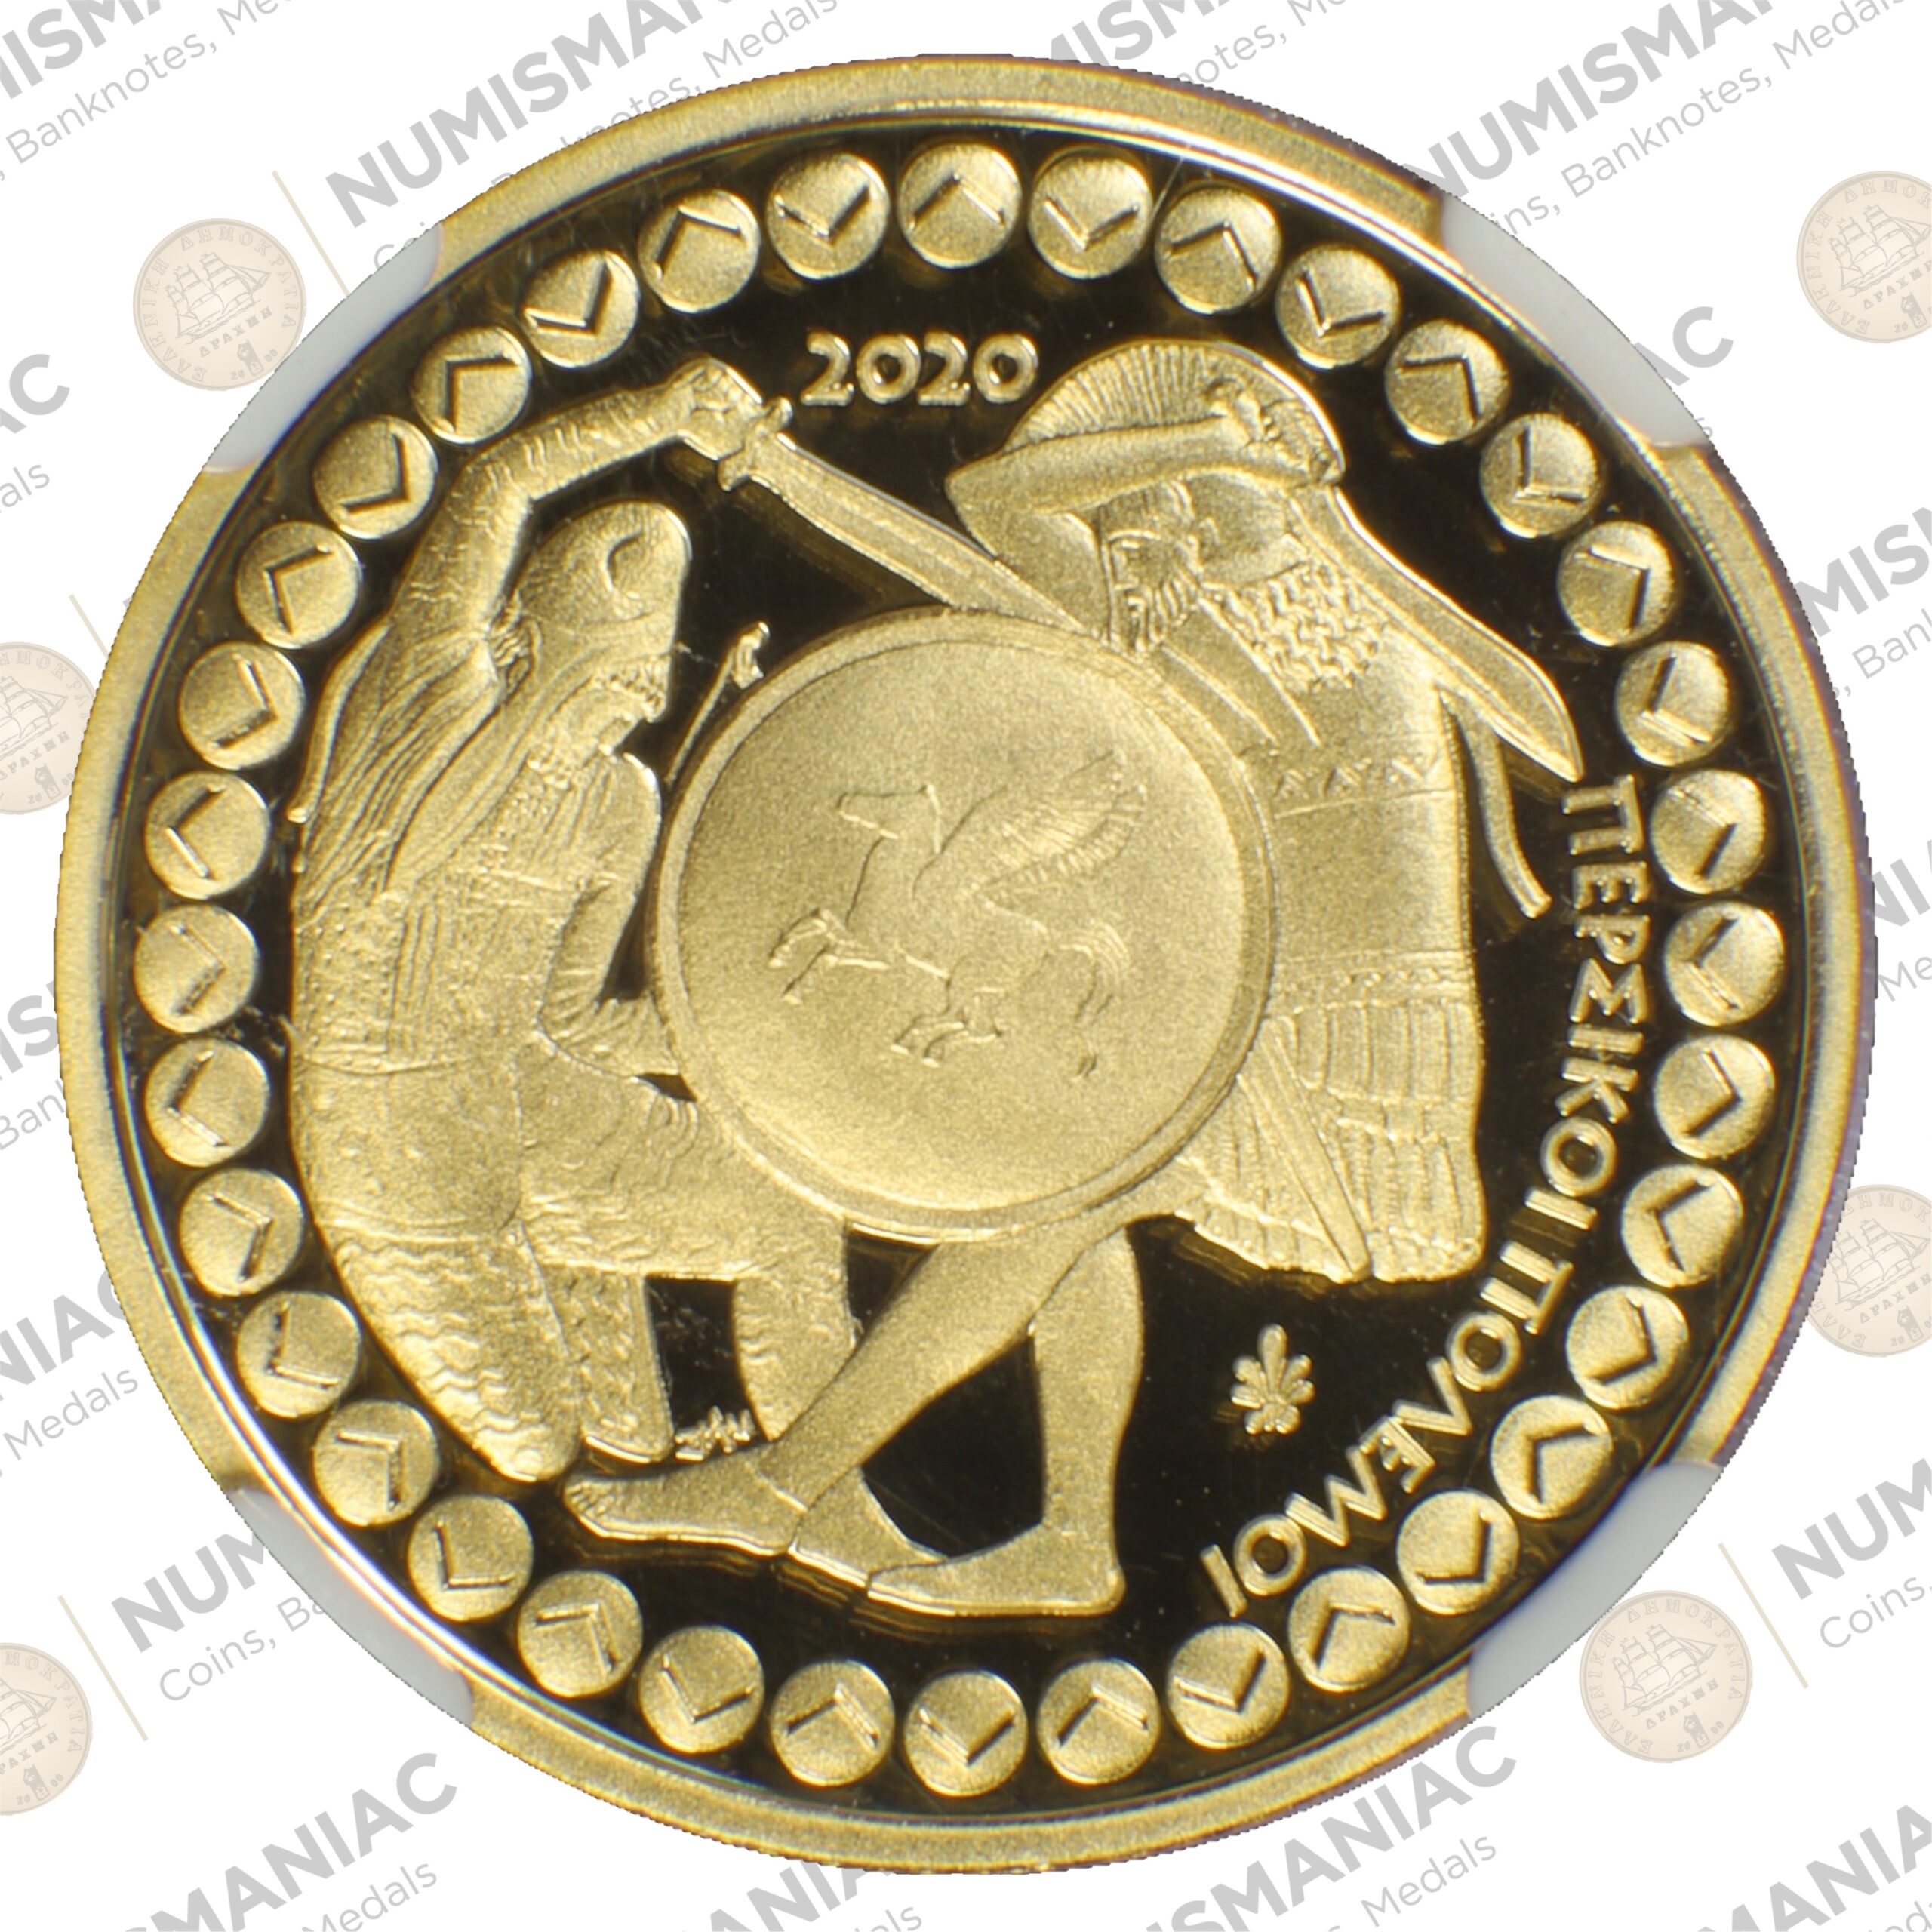 Greece 🇬🇷 2020 Gold Coin € 200 "The Persian wars"A